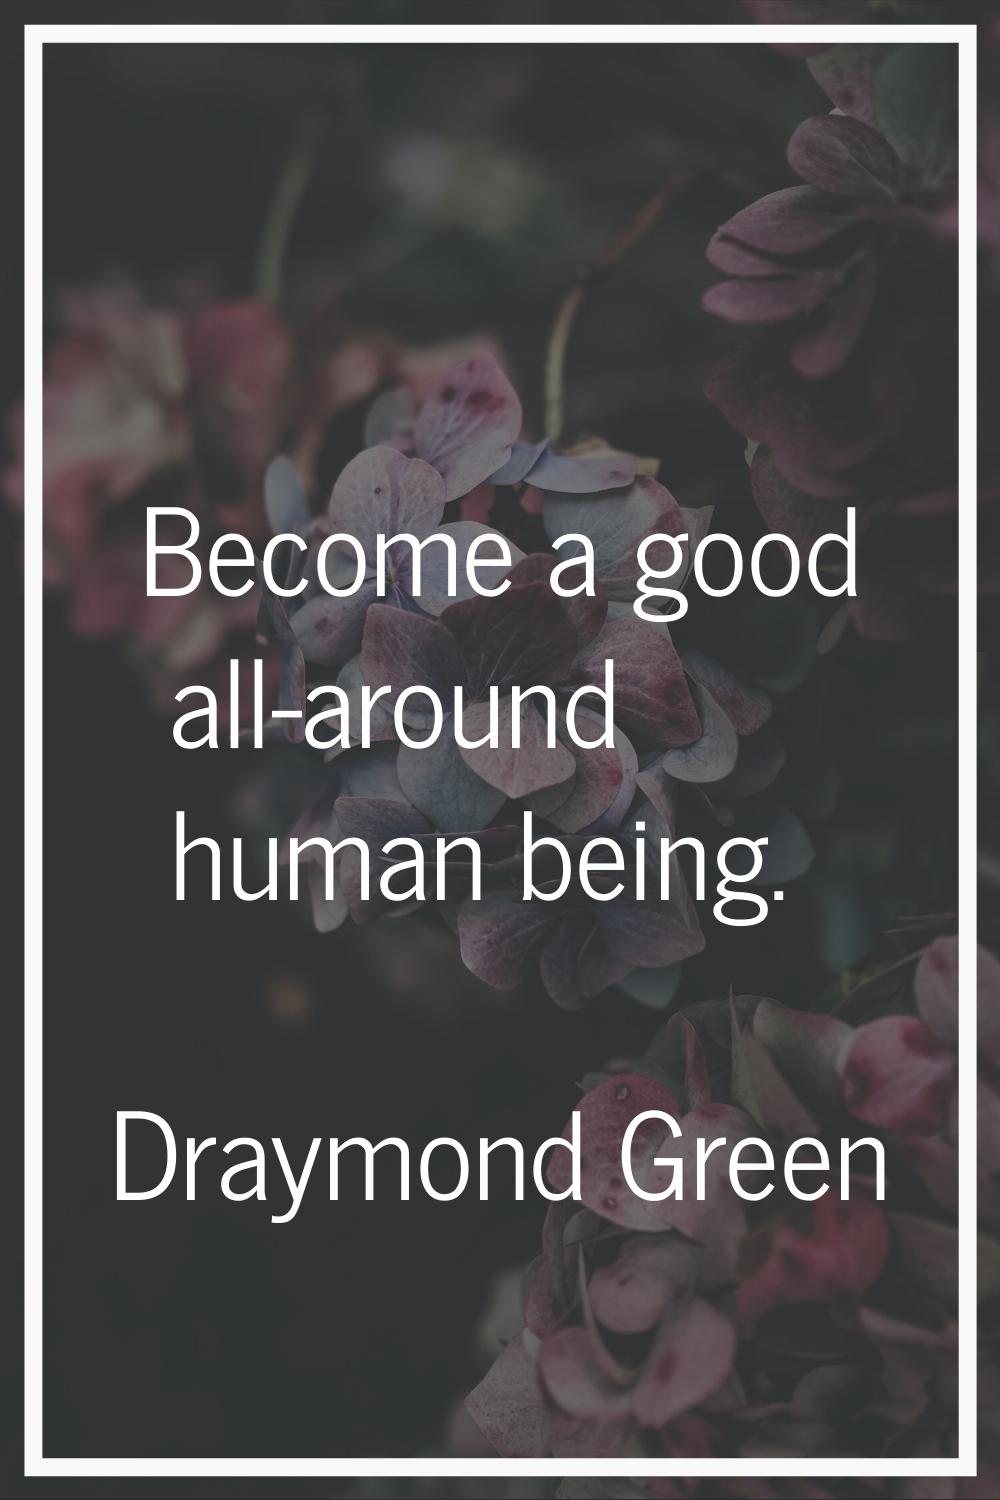 Become a good all-around human being.